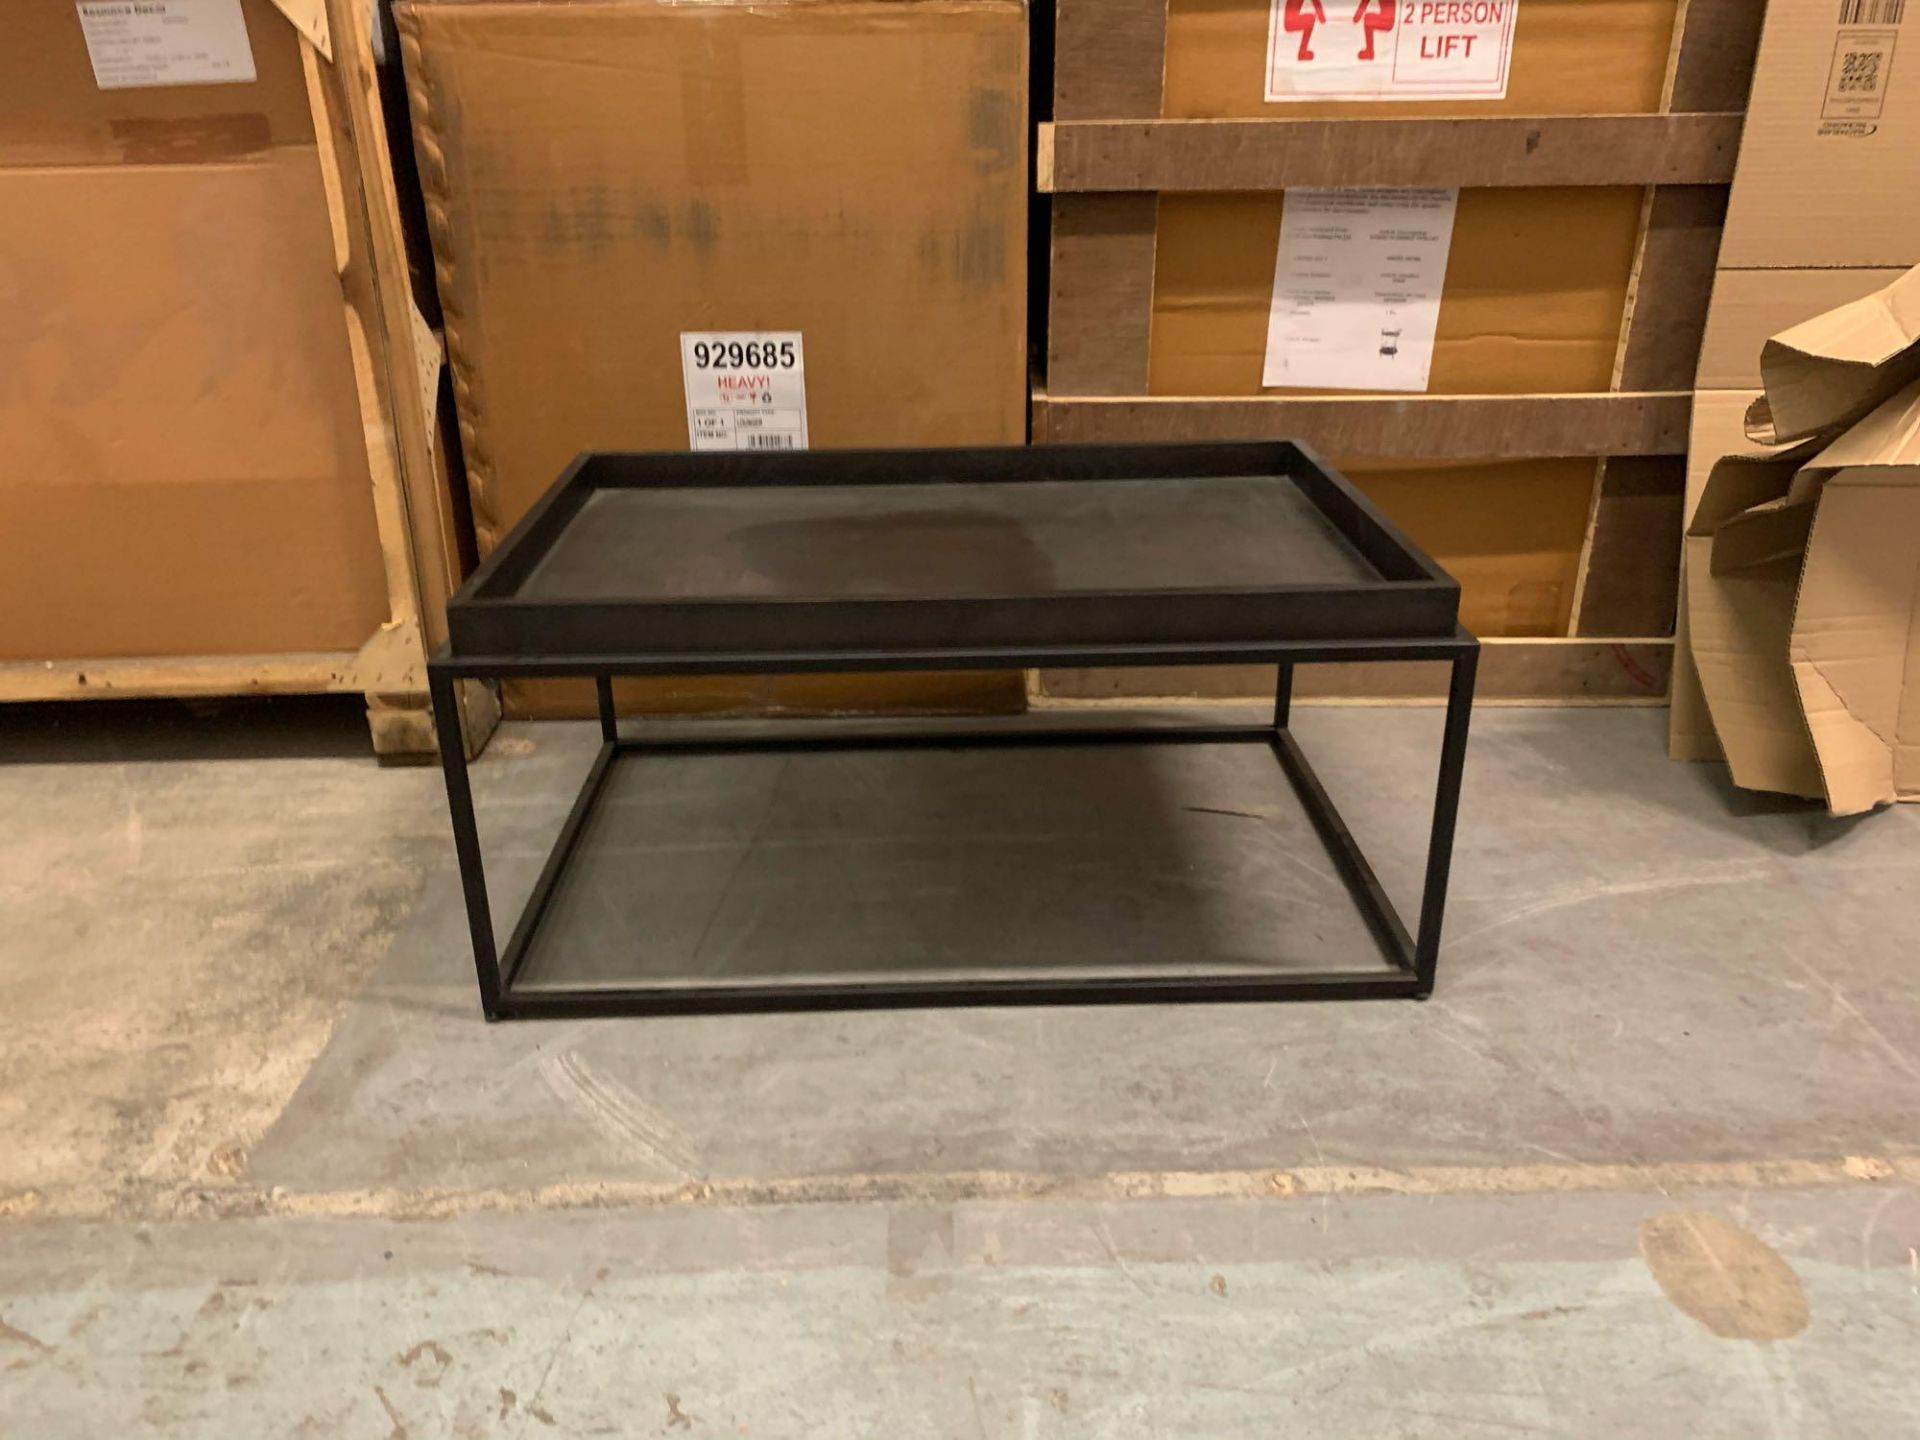 Forden Tray Coffee Table Black W900 x D600 x H400mm The Forden Black Side Table Completed With A - Bild 5 aus 5